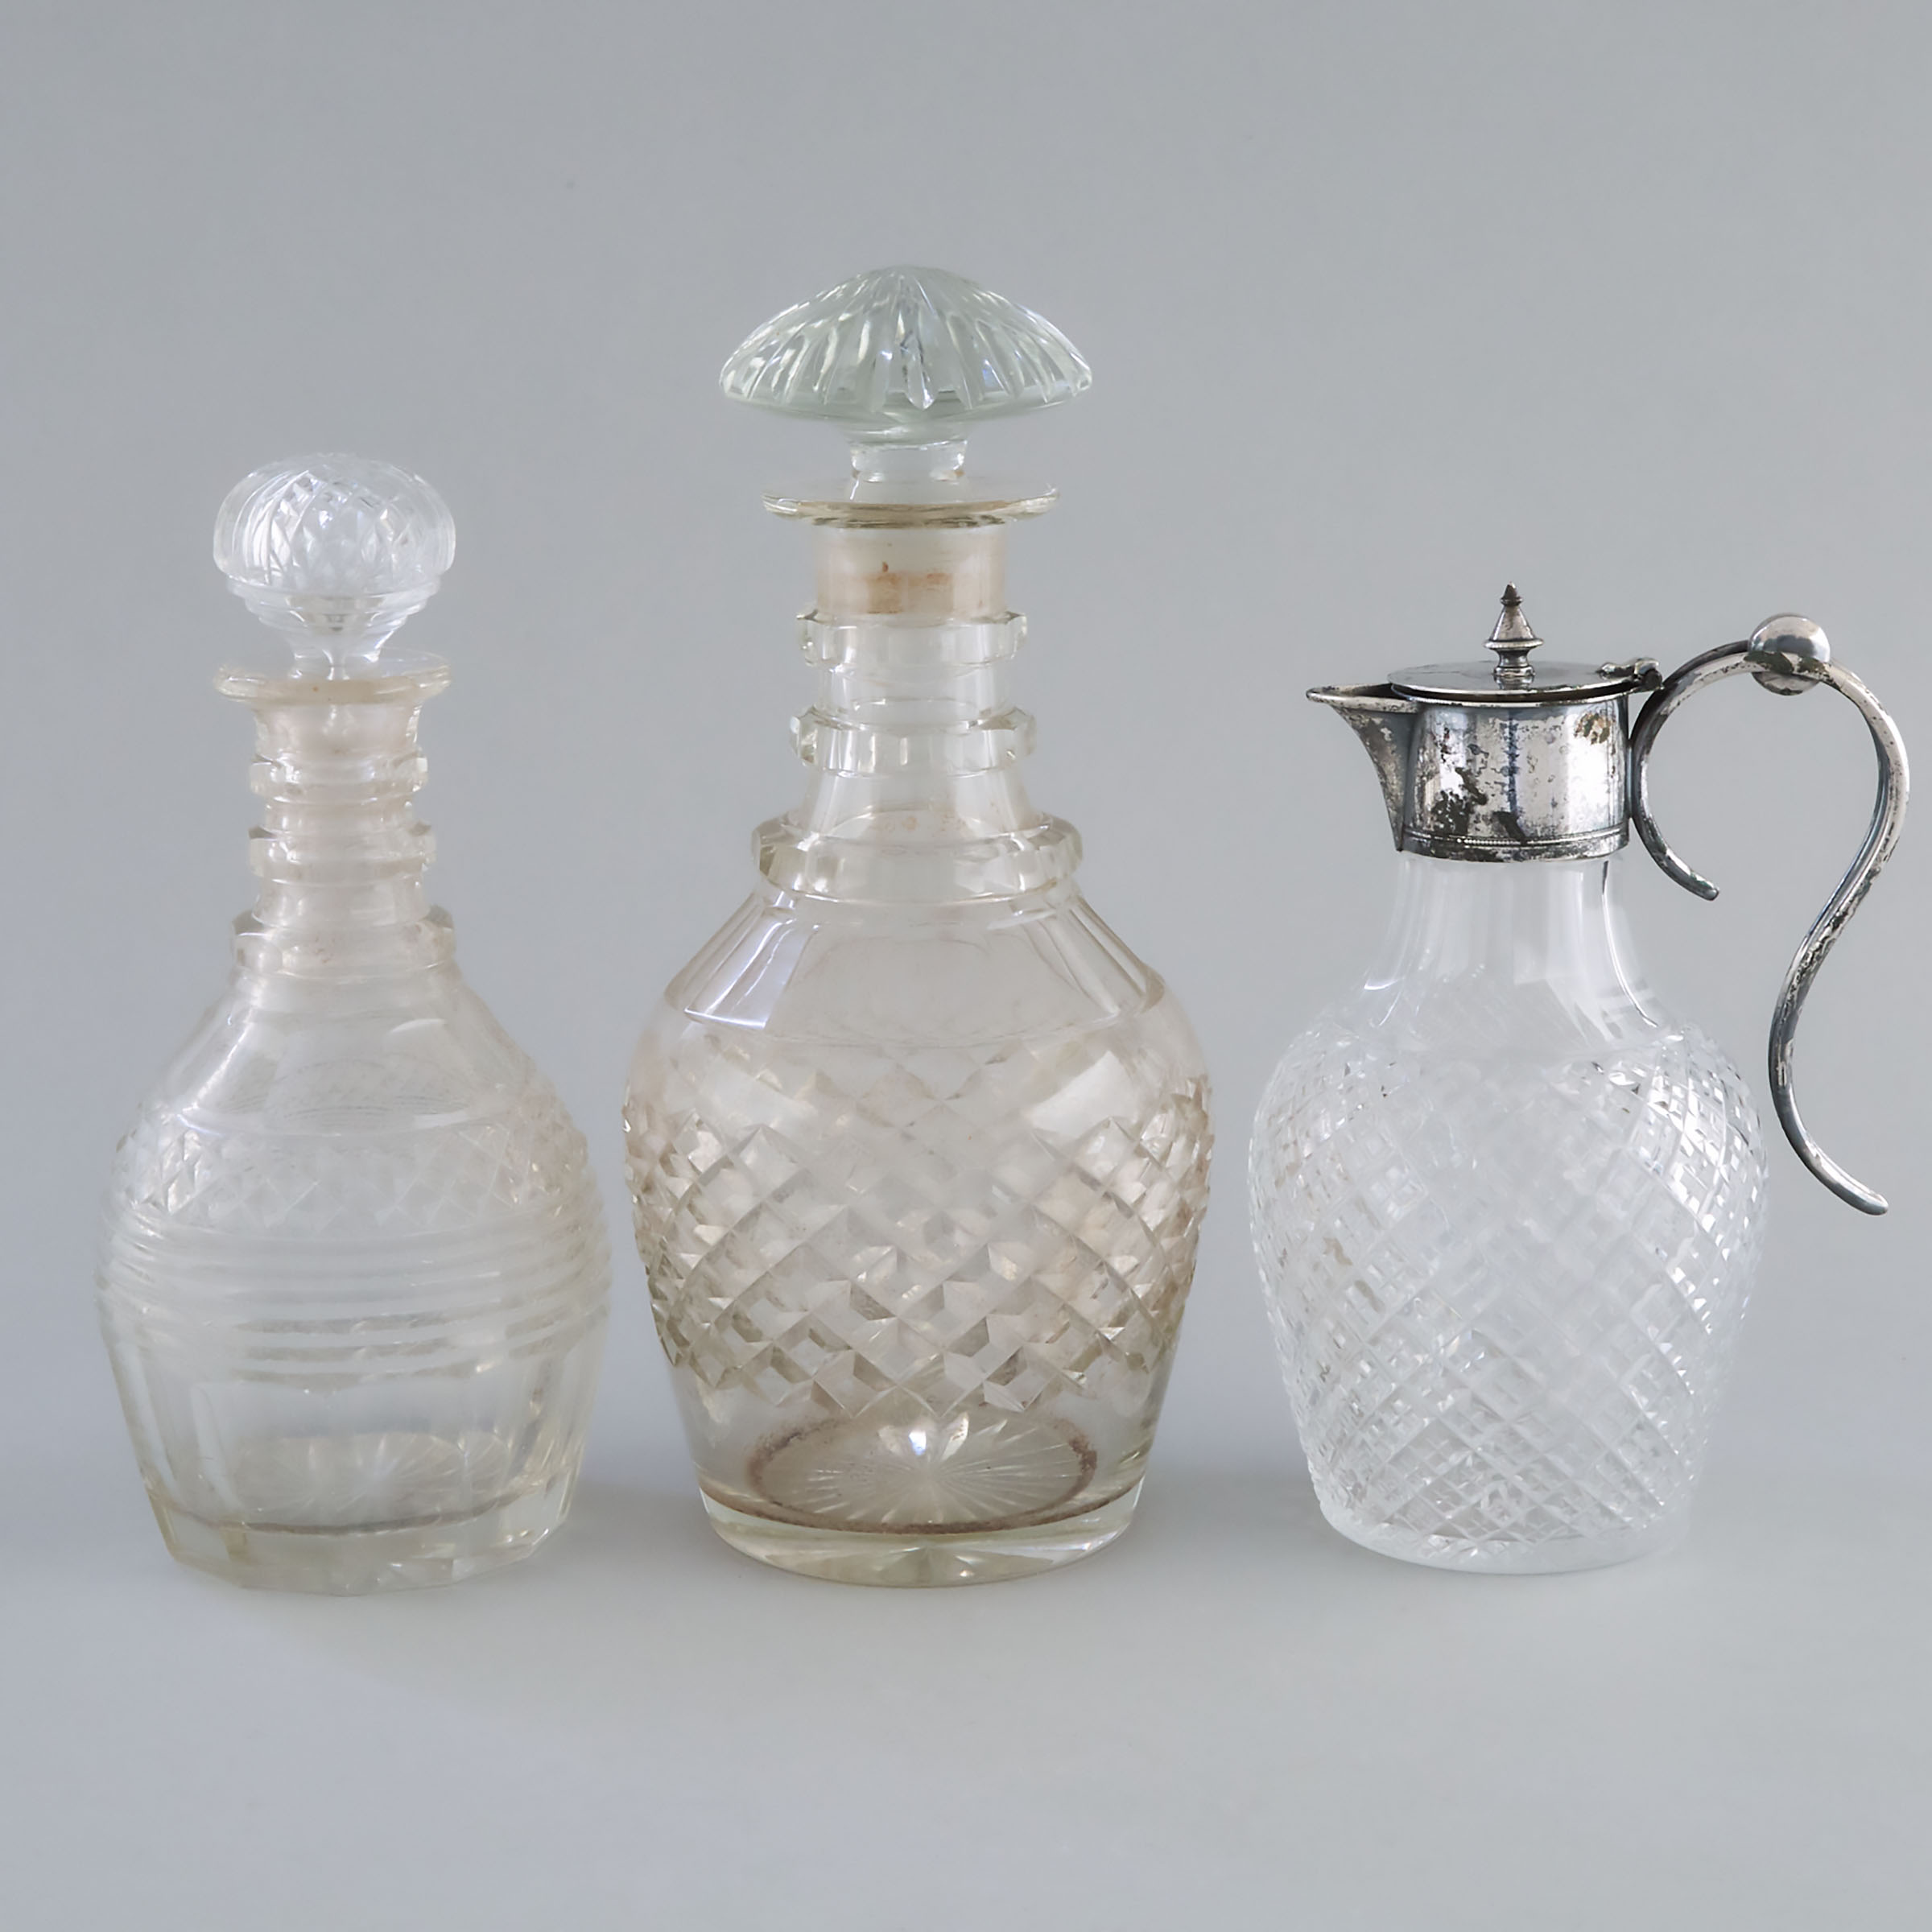 Two Anglo-Irish Cut Glass Decanters and a Silver Plate Mounted Claret Jug, 19th century